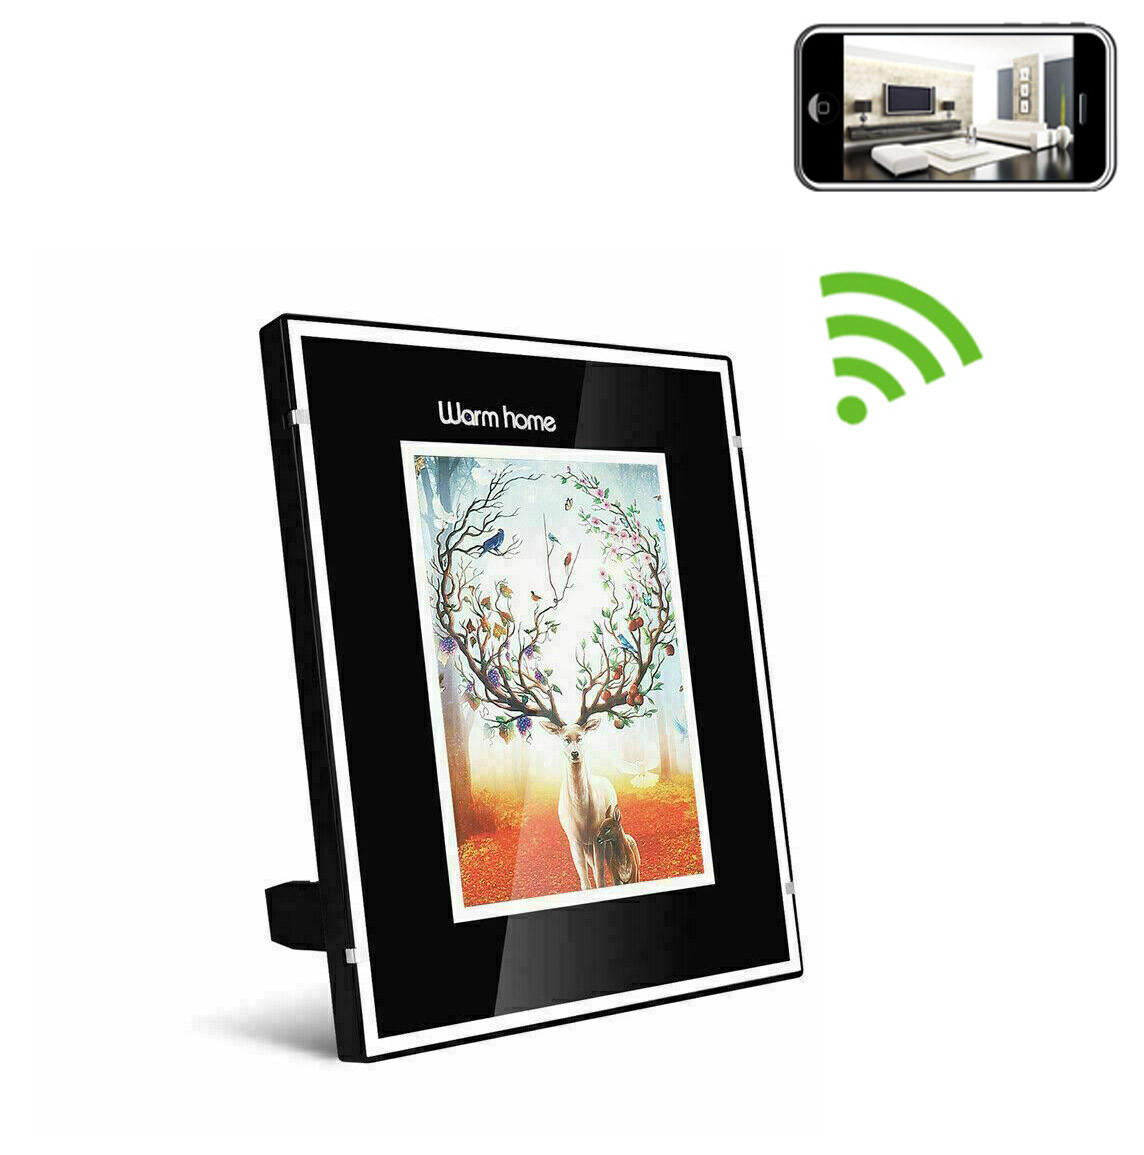 Picture Frame Camera with Build-in DVR and WiFi Remote Viewing from Android and iPhones